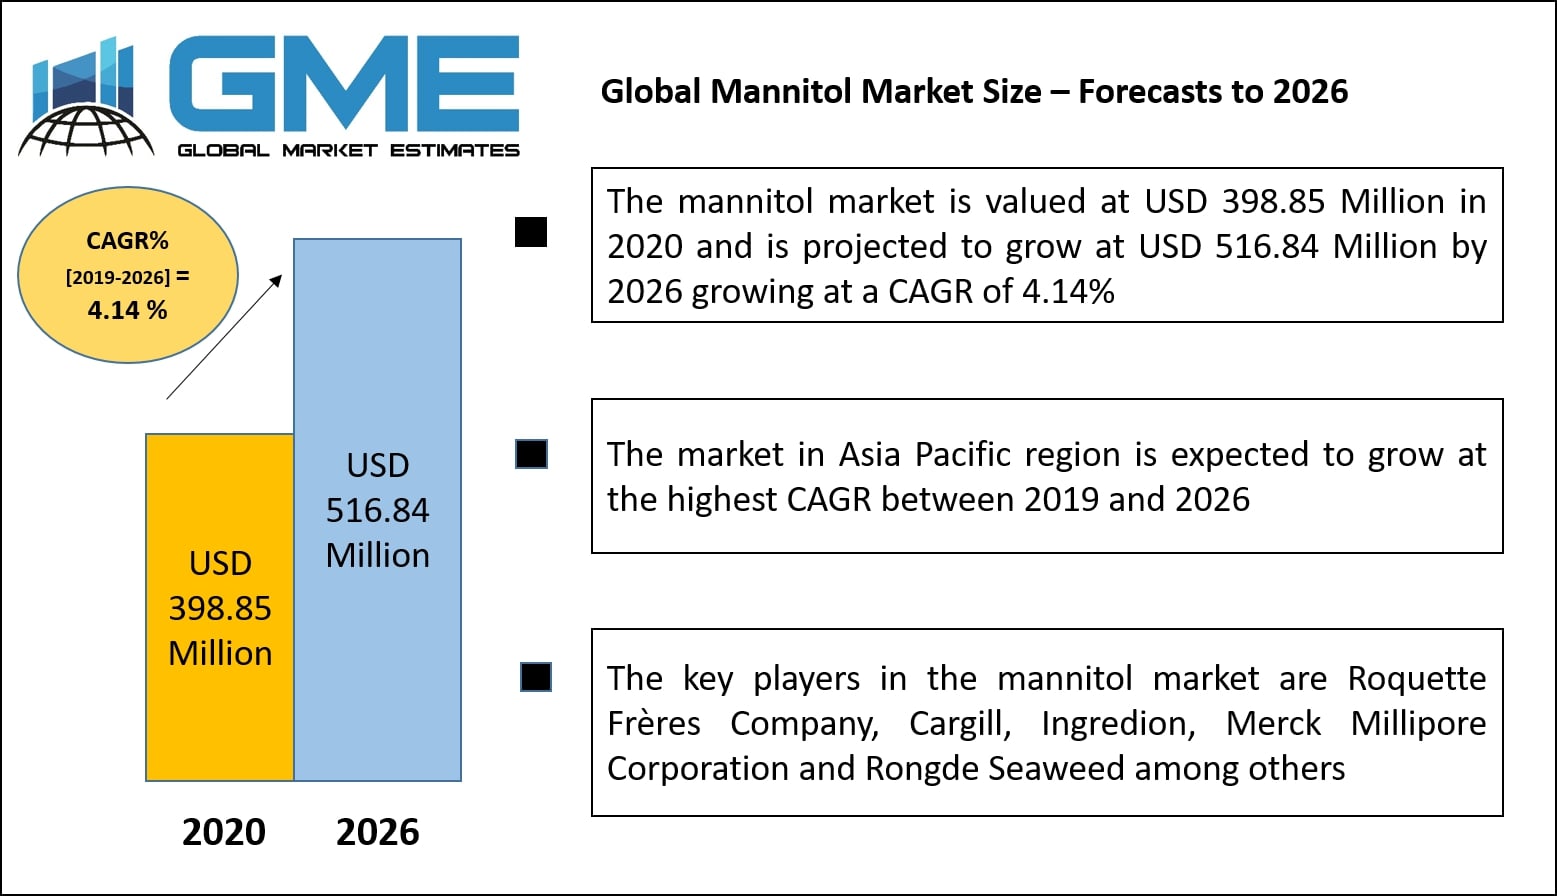 Global Mannitol Market Size – Forecasts to 2026